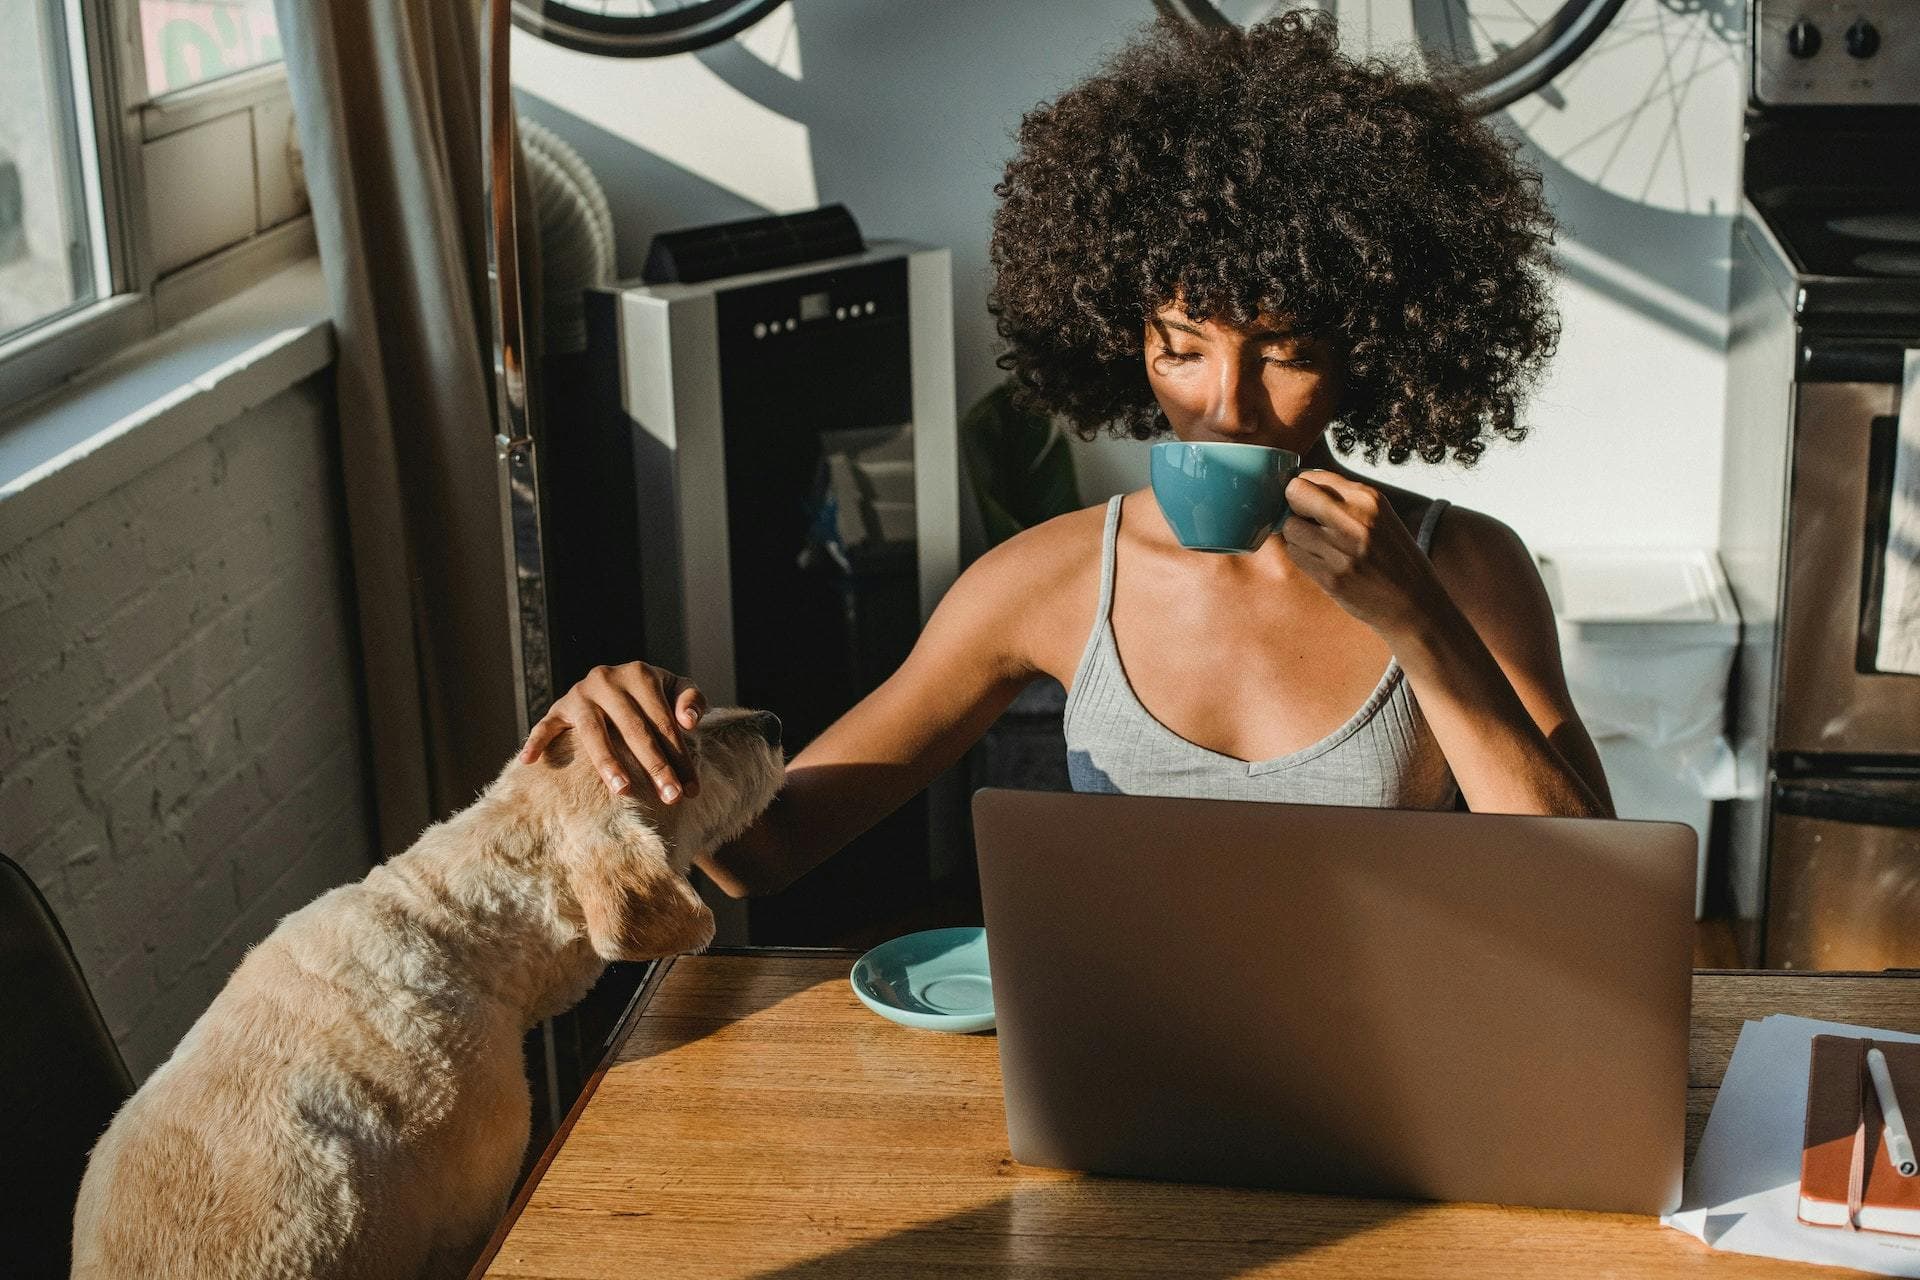 Freelancer working at laptop sipping from a blue mug while petty a dog